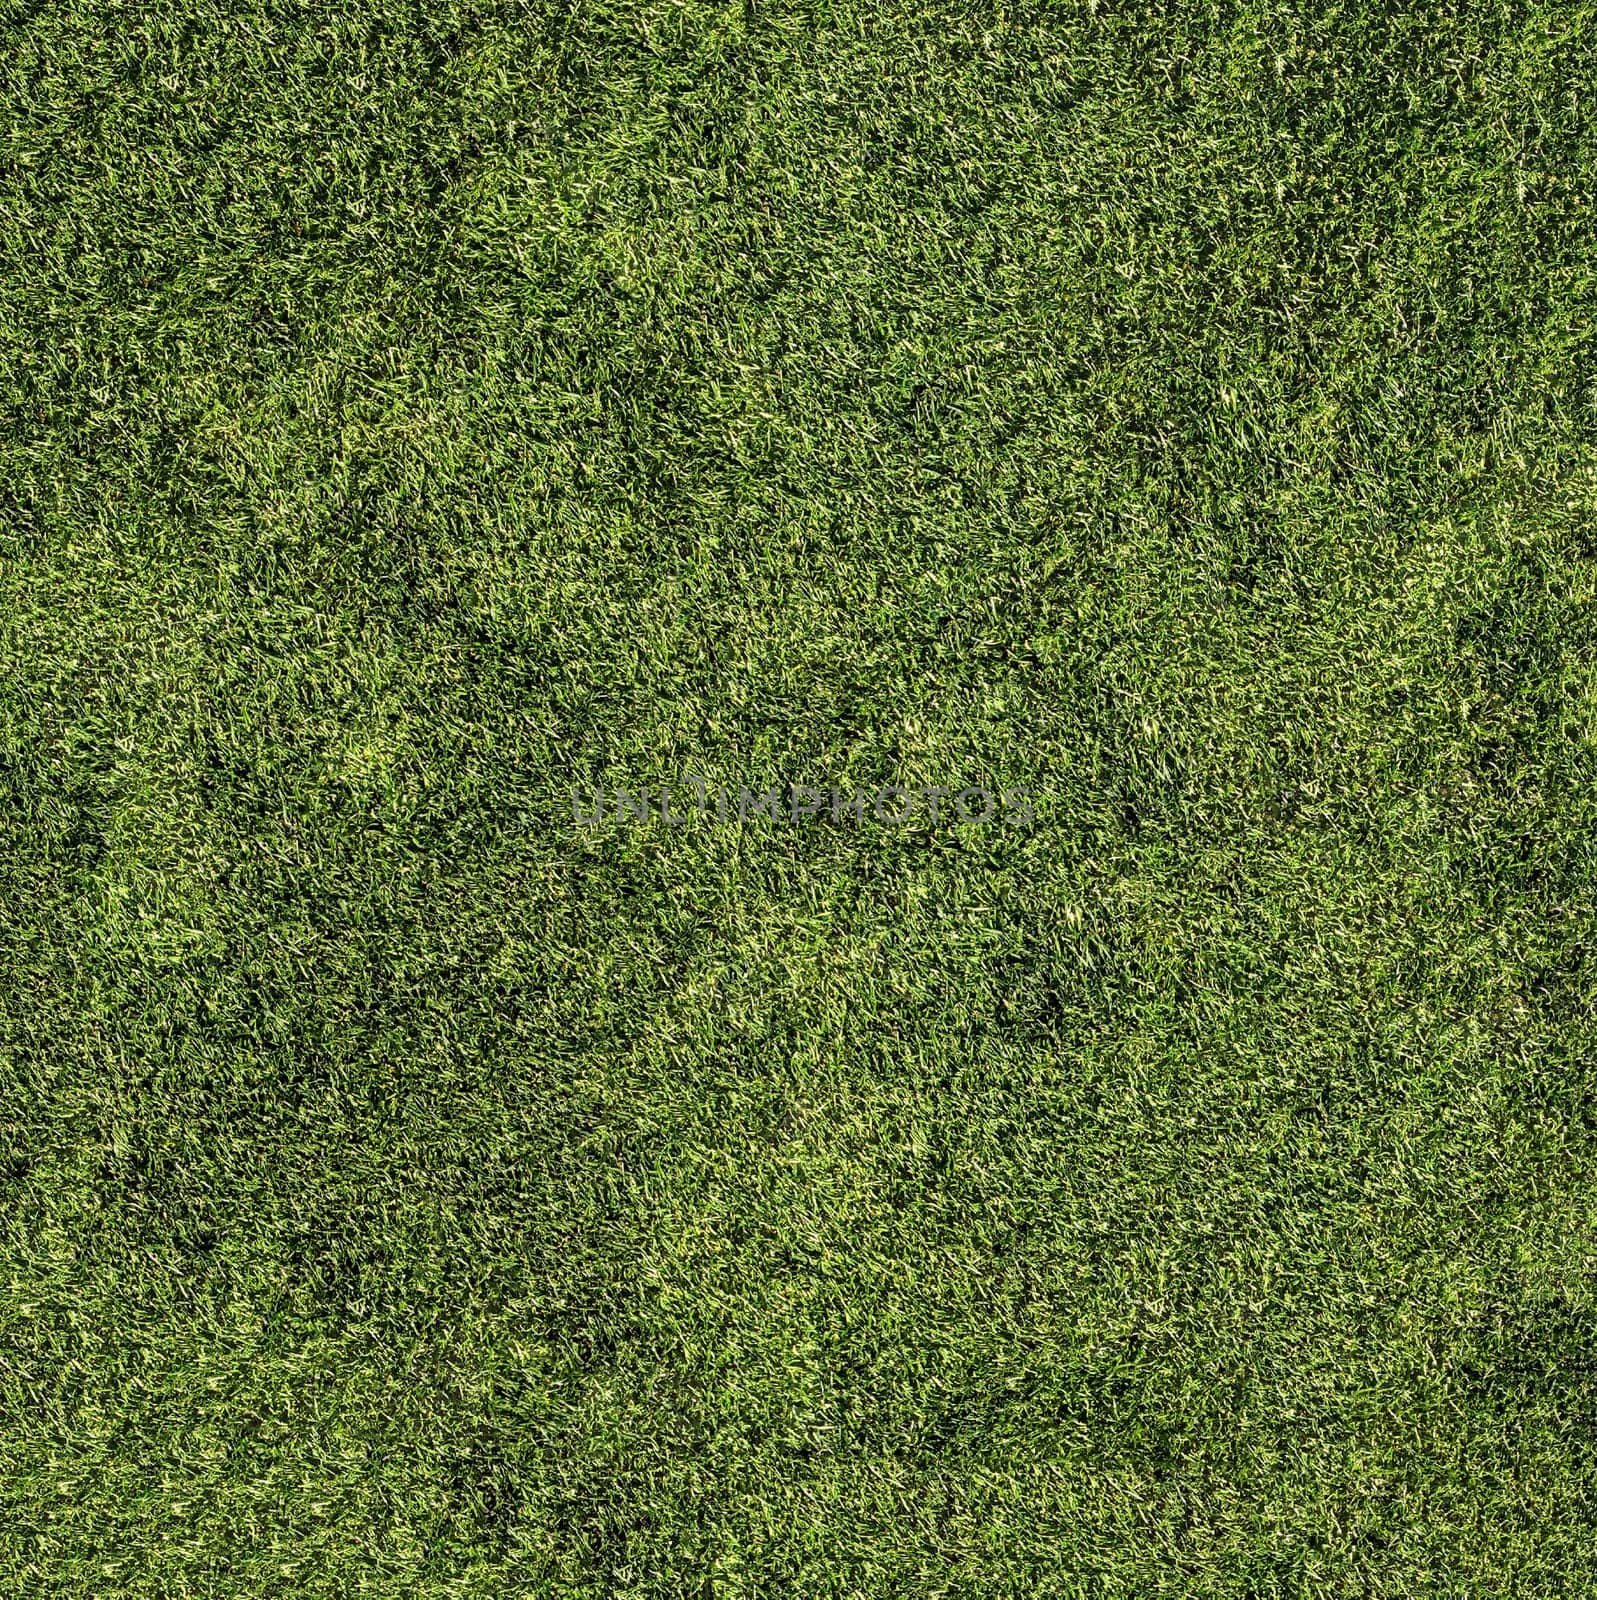 Top view of green grass with a short-cropped texture by Mastak80